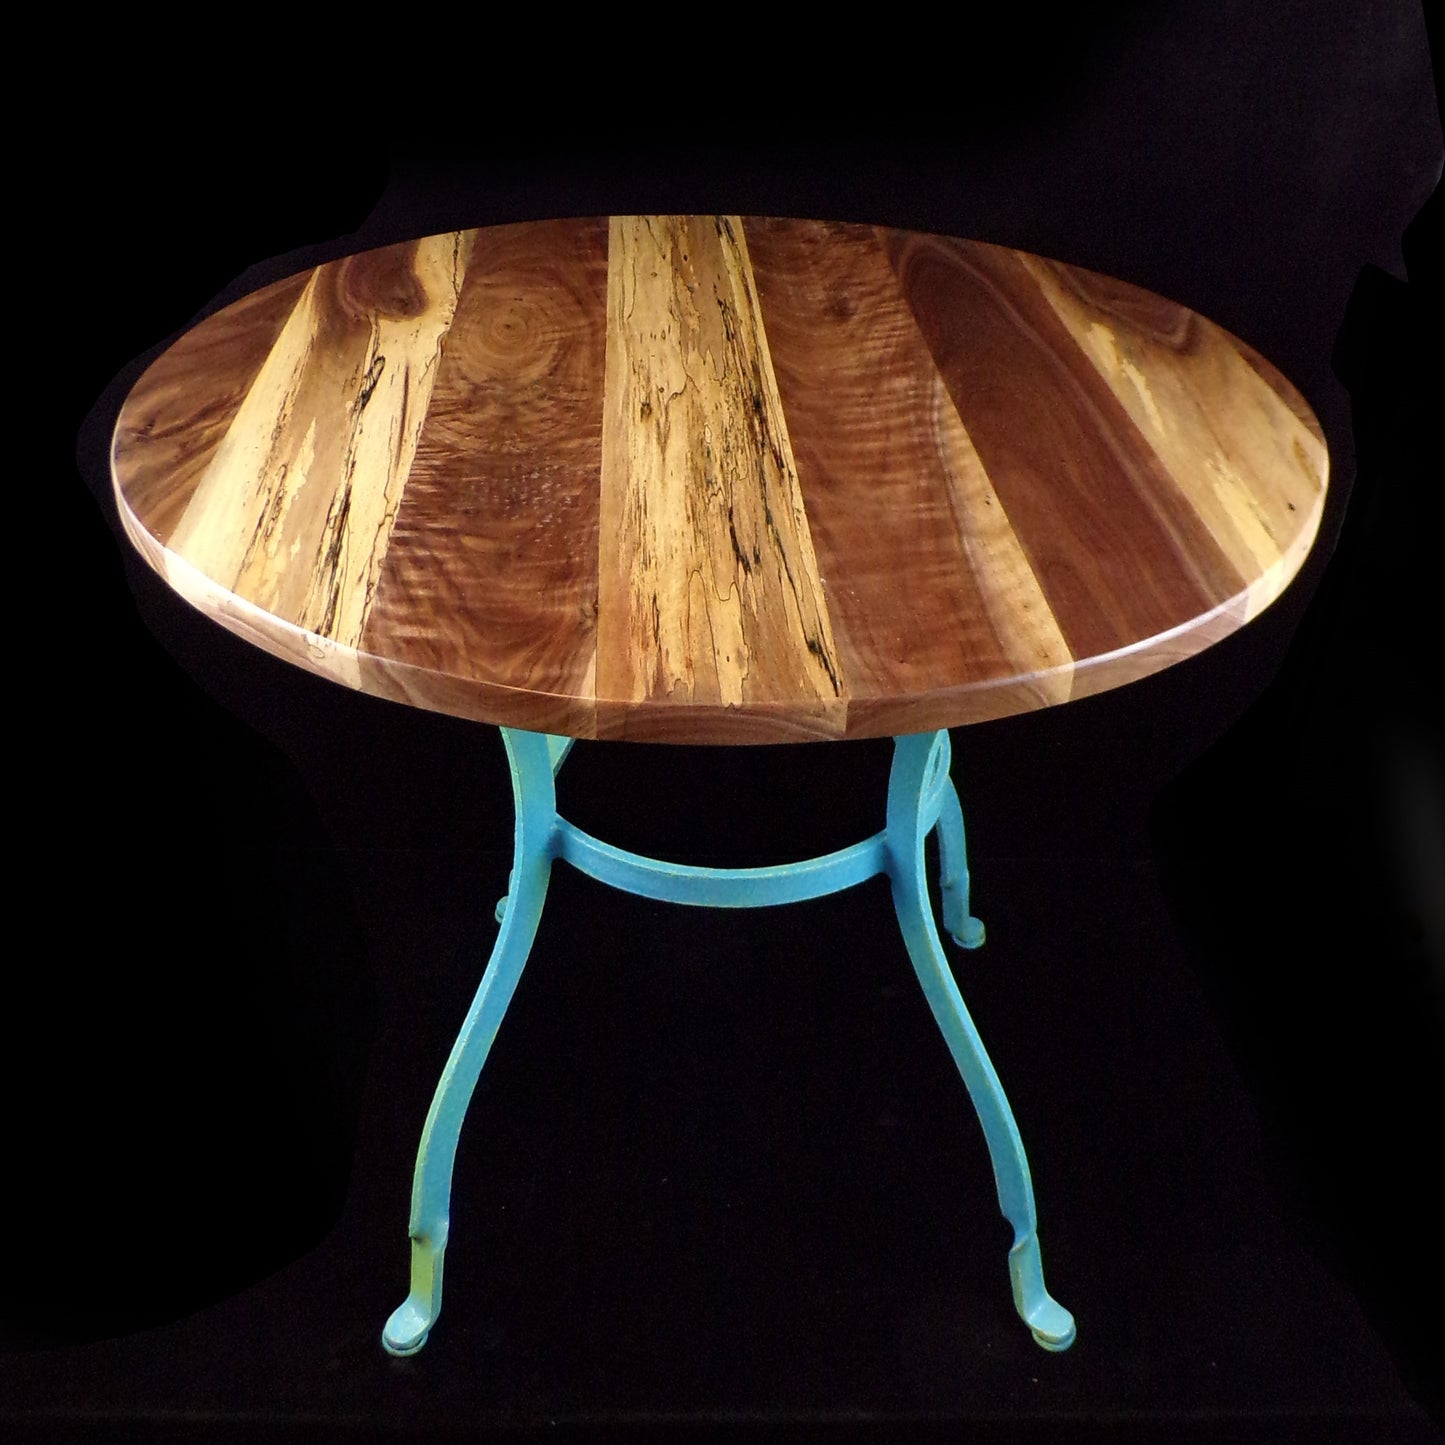 Walnut and Teal Metal Table